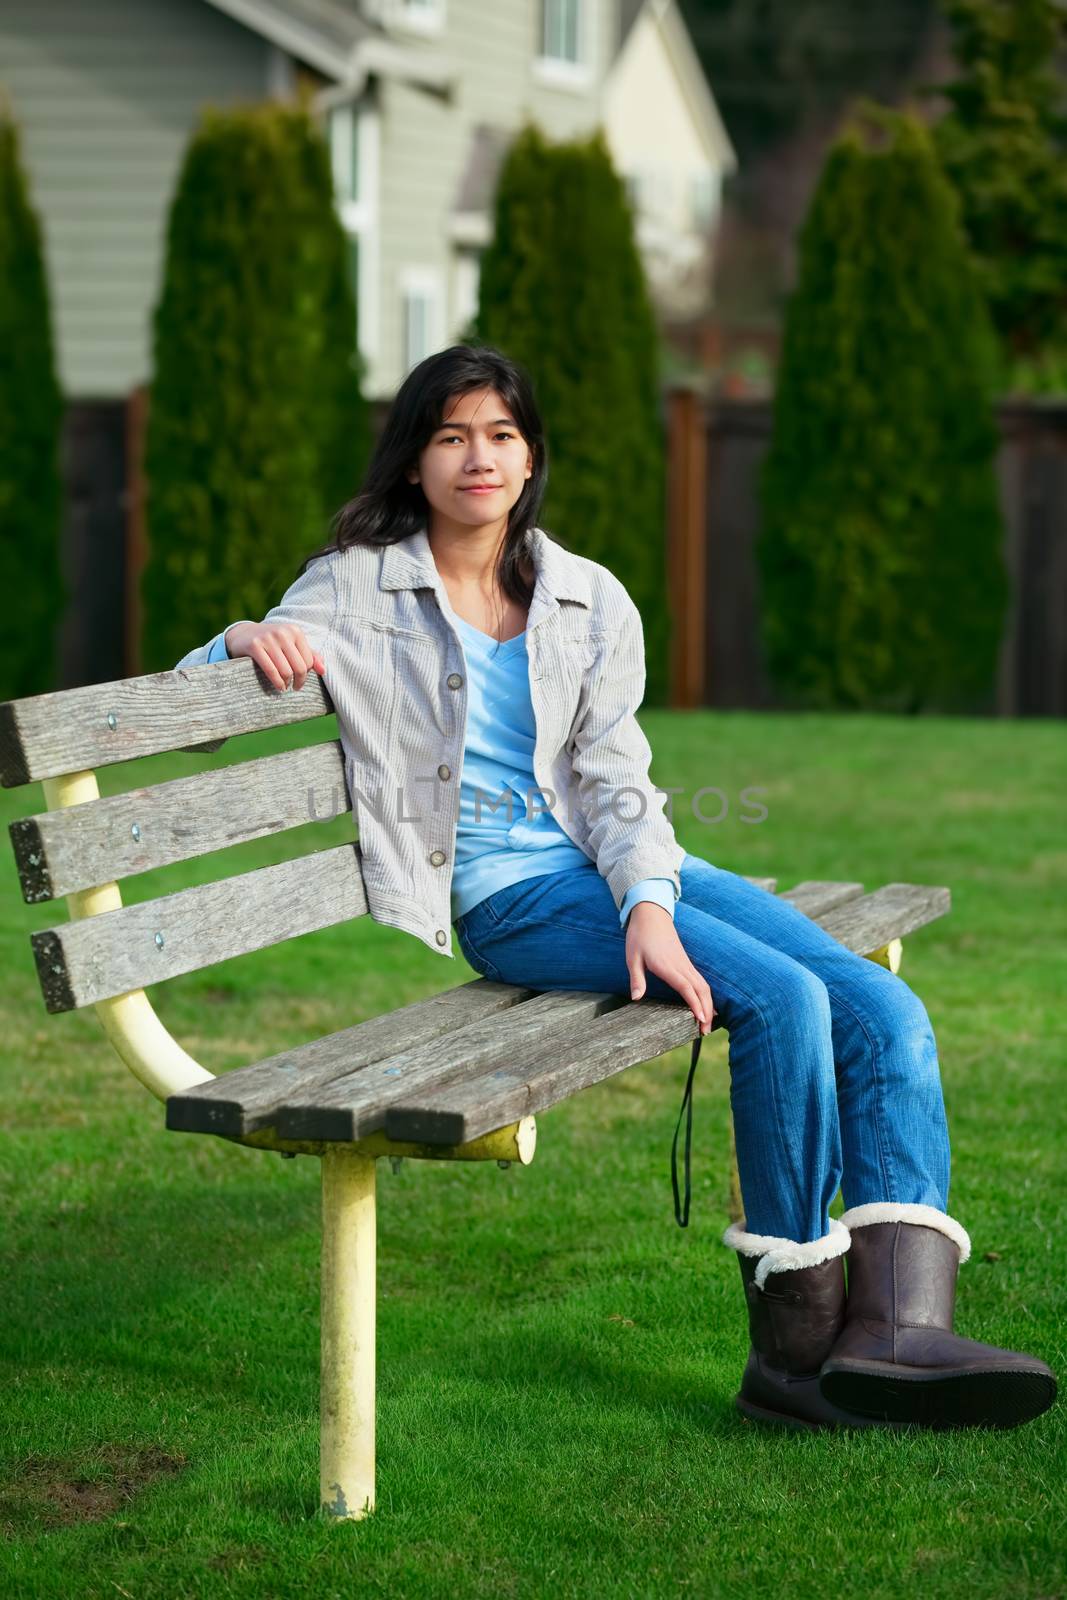 Young biracial teen girl relaxing outdoors on park bench by jarenwicklund